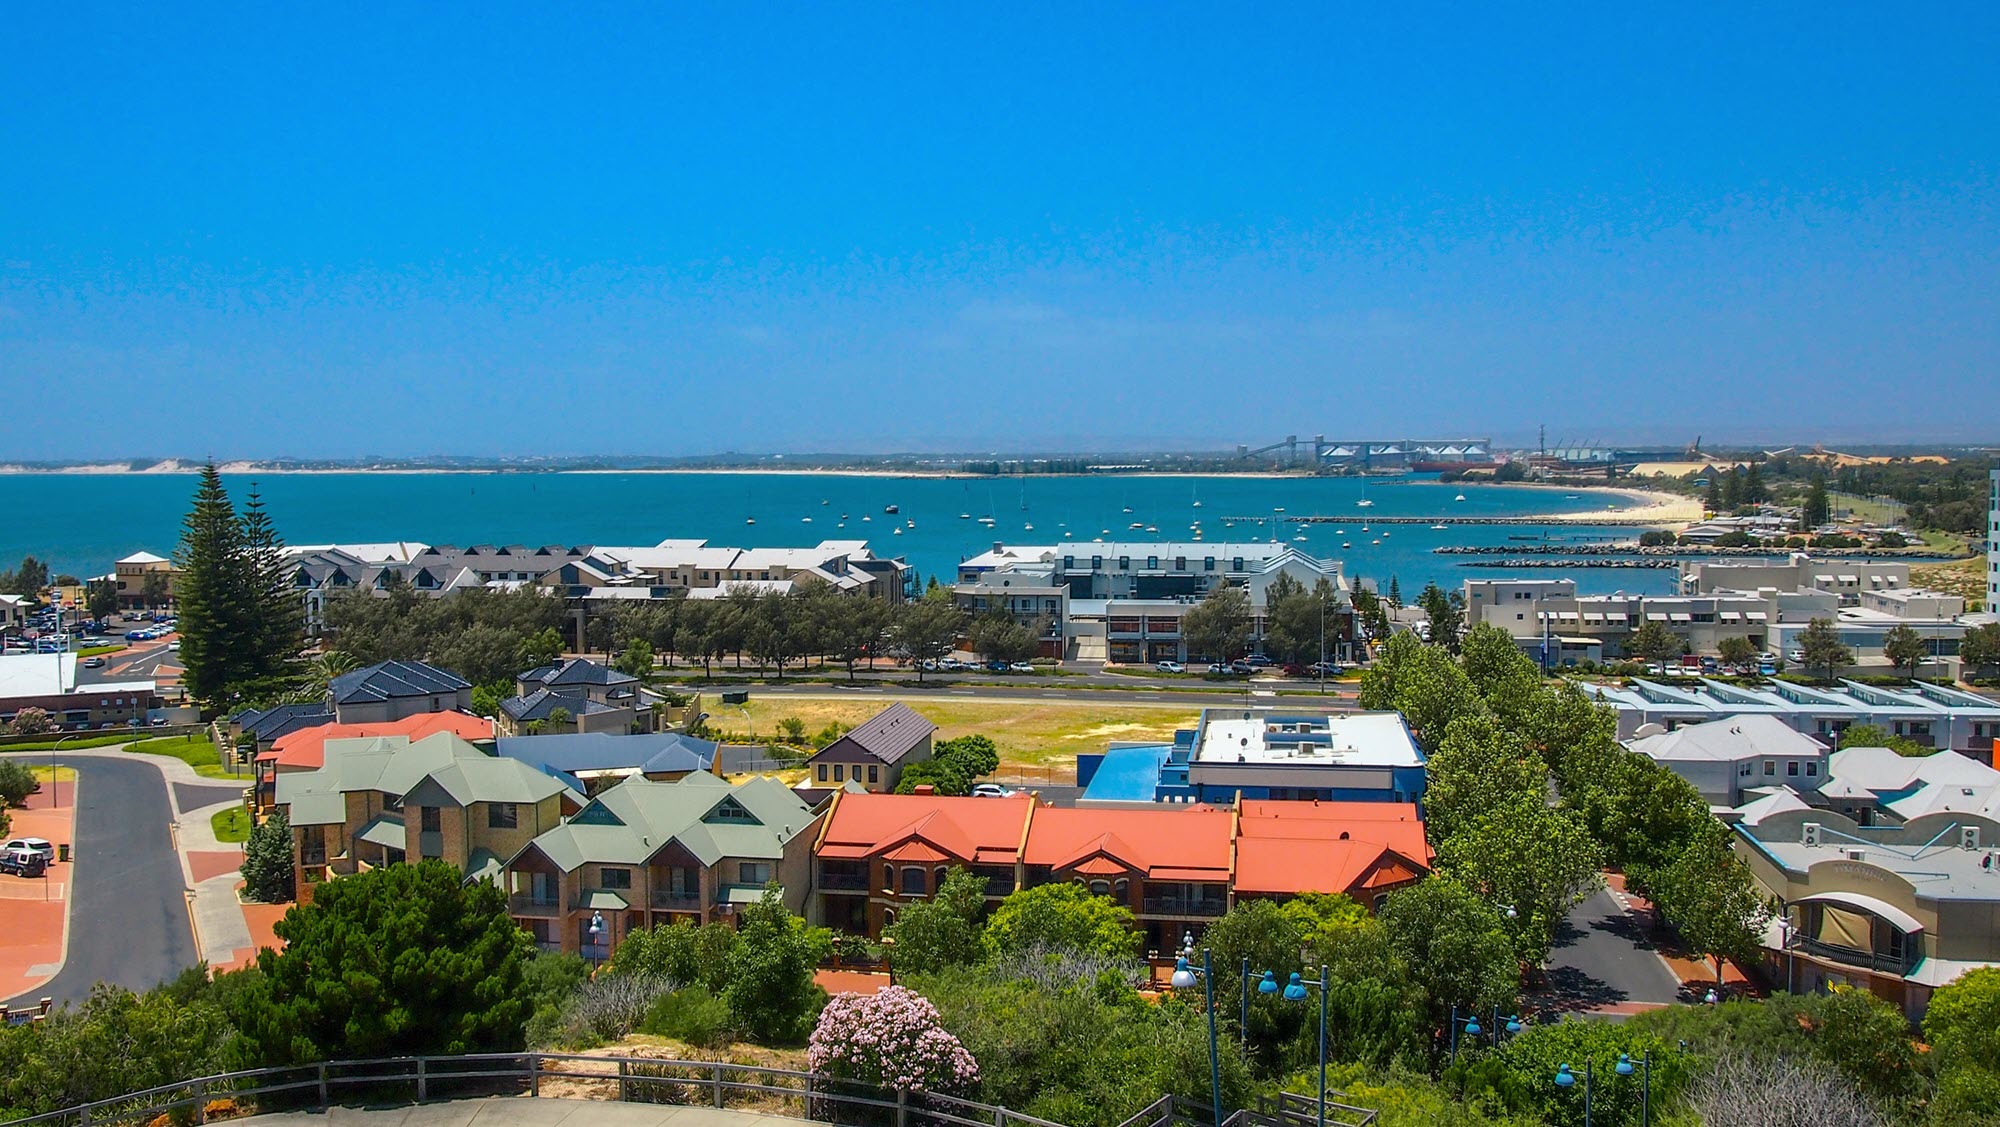 View over the town of Bunbury in Western Australia's south west.